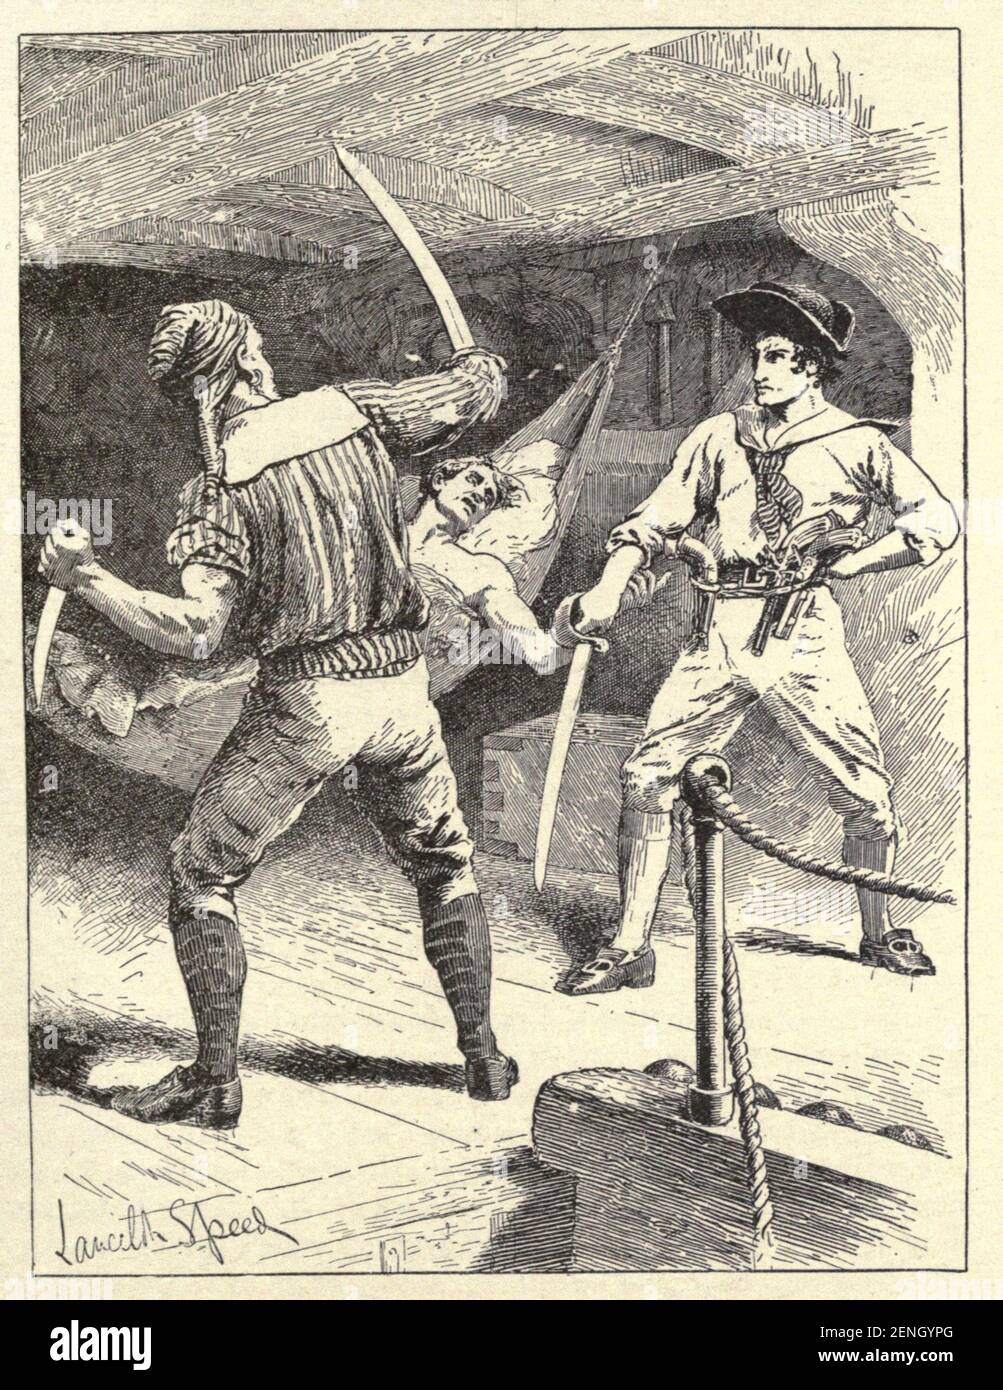 Captain Snelgrave and the Pirates From the book ' The true story book ' Edited by ANDREW LANG illustrated by L. BOGLE, LUCIEN DAVIS, H. J. FORD, C. H. M. KERR, and LANCELOT SPEED. Published by Longmans, Green, and Co. London and New York in 1893 Stock Photo